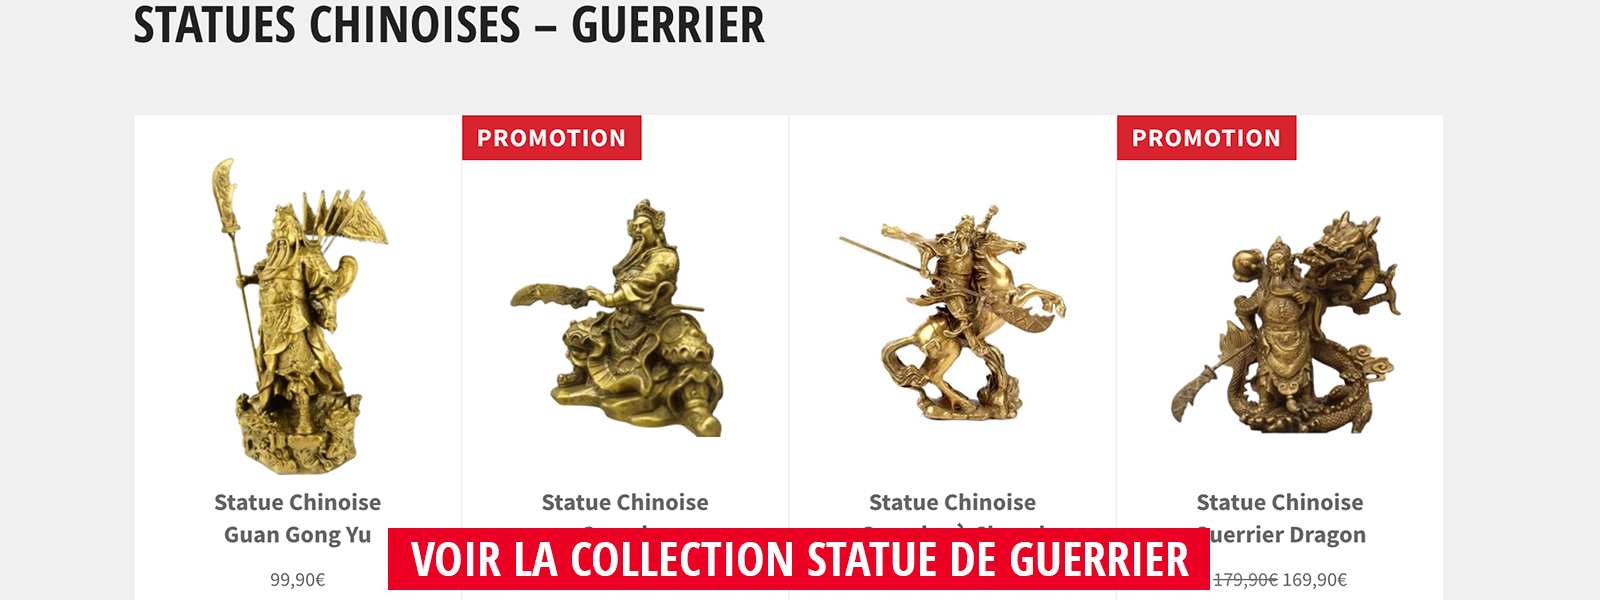 Collection statue chinoise guerrier